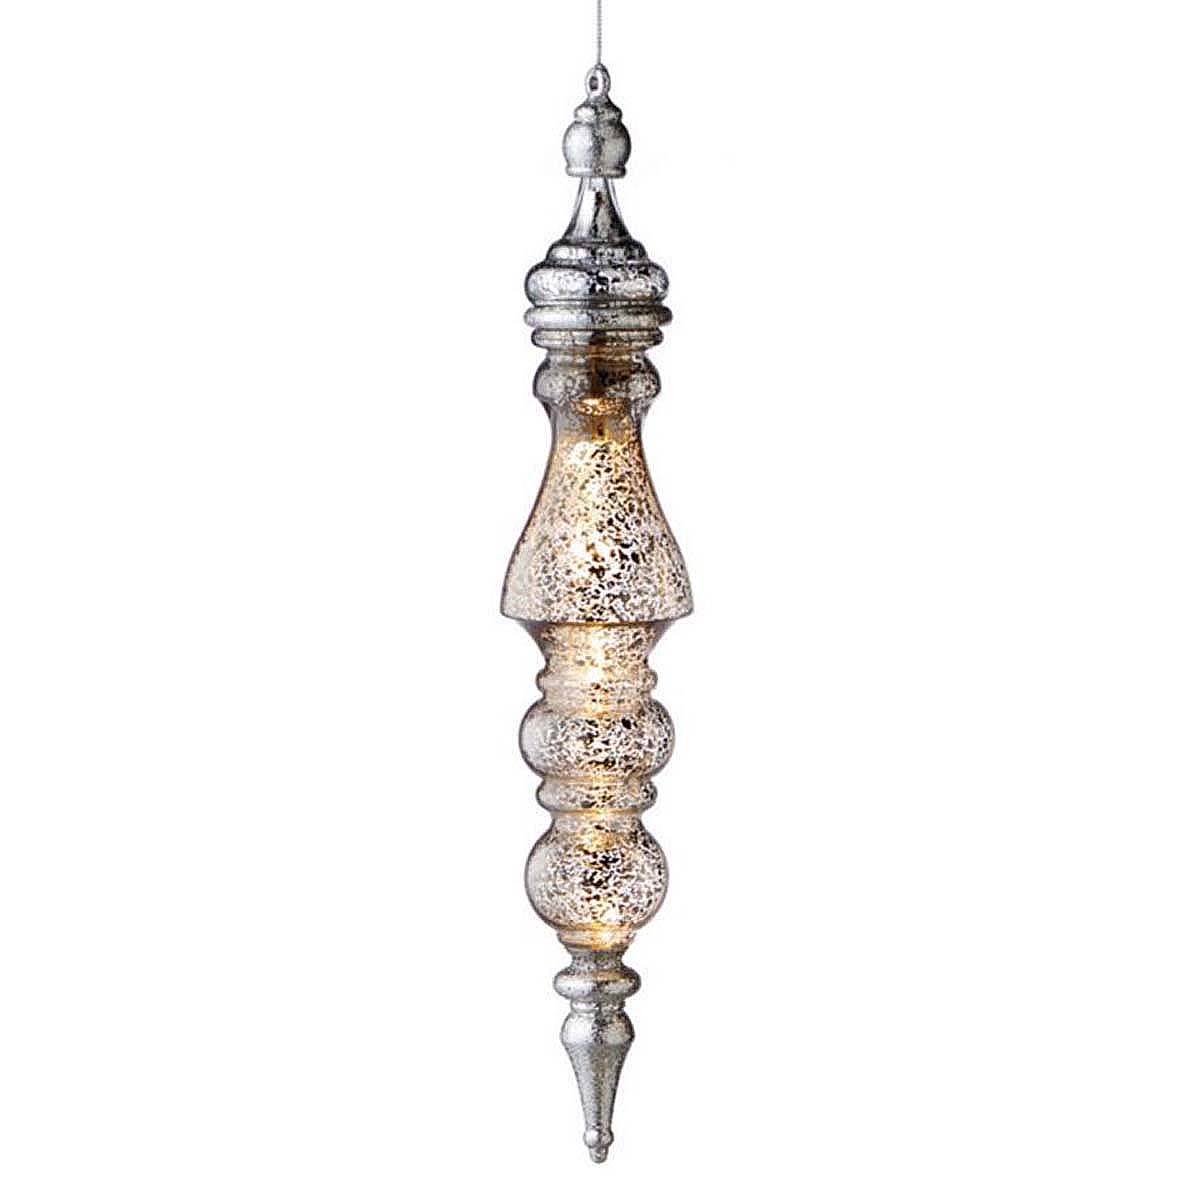 Lighted Large Speckled Finial Ornament